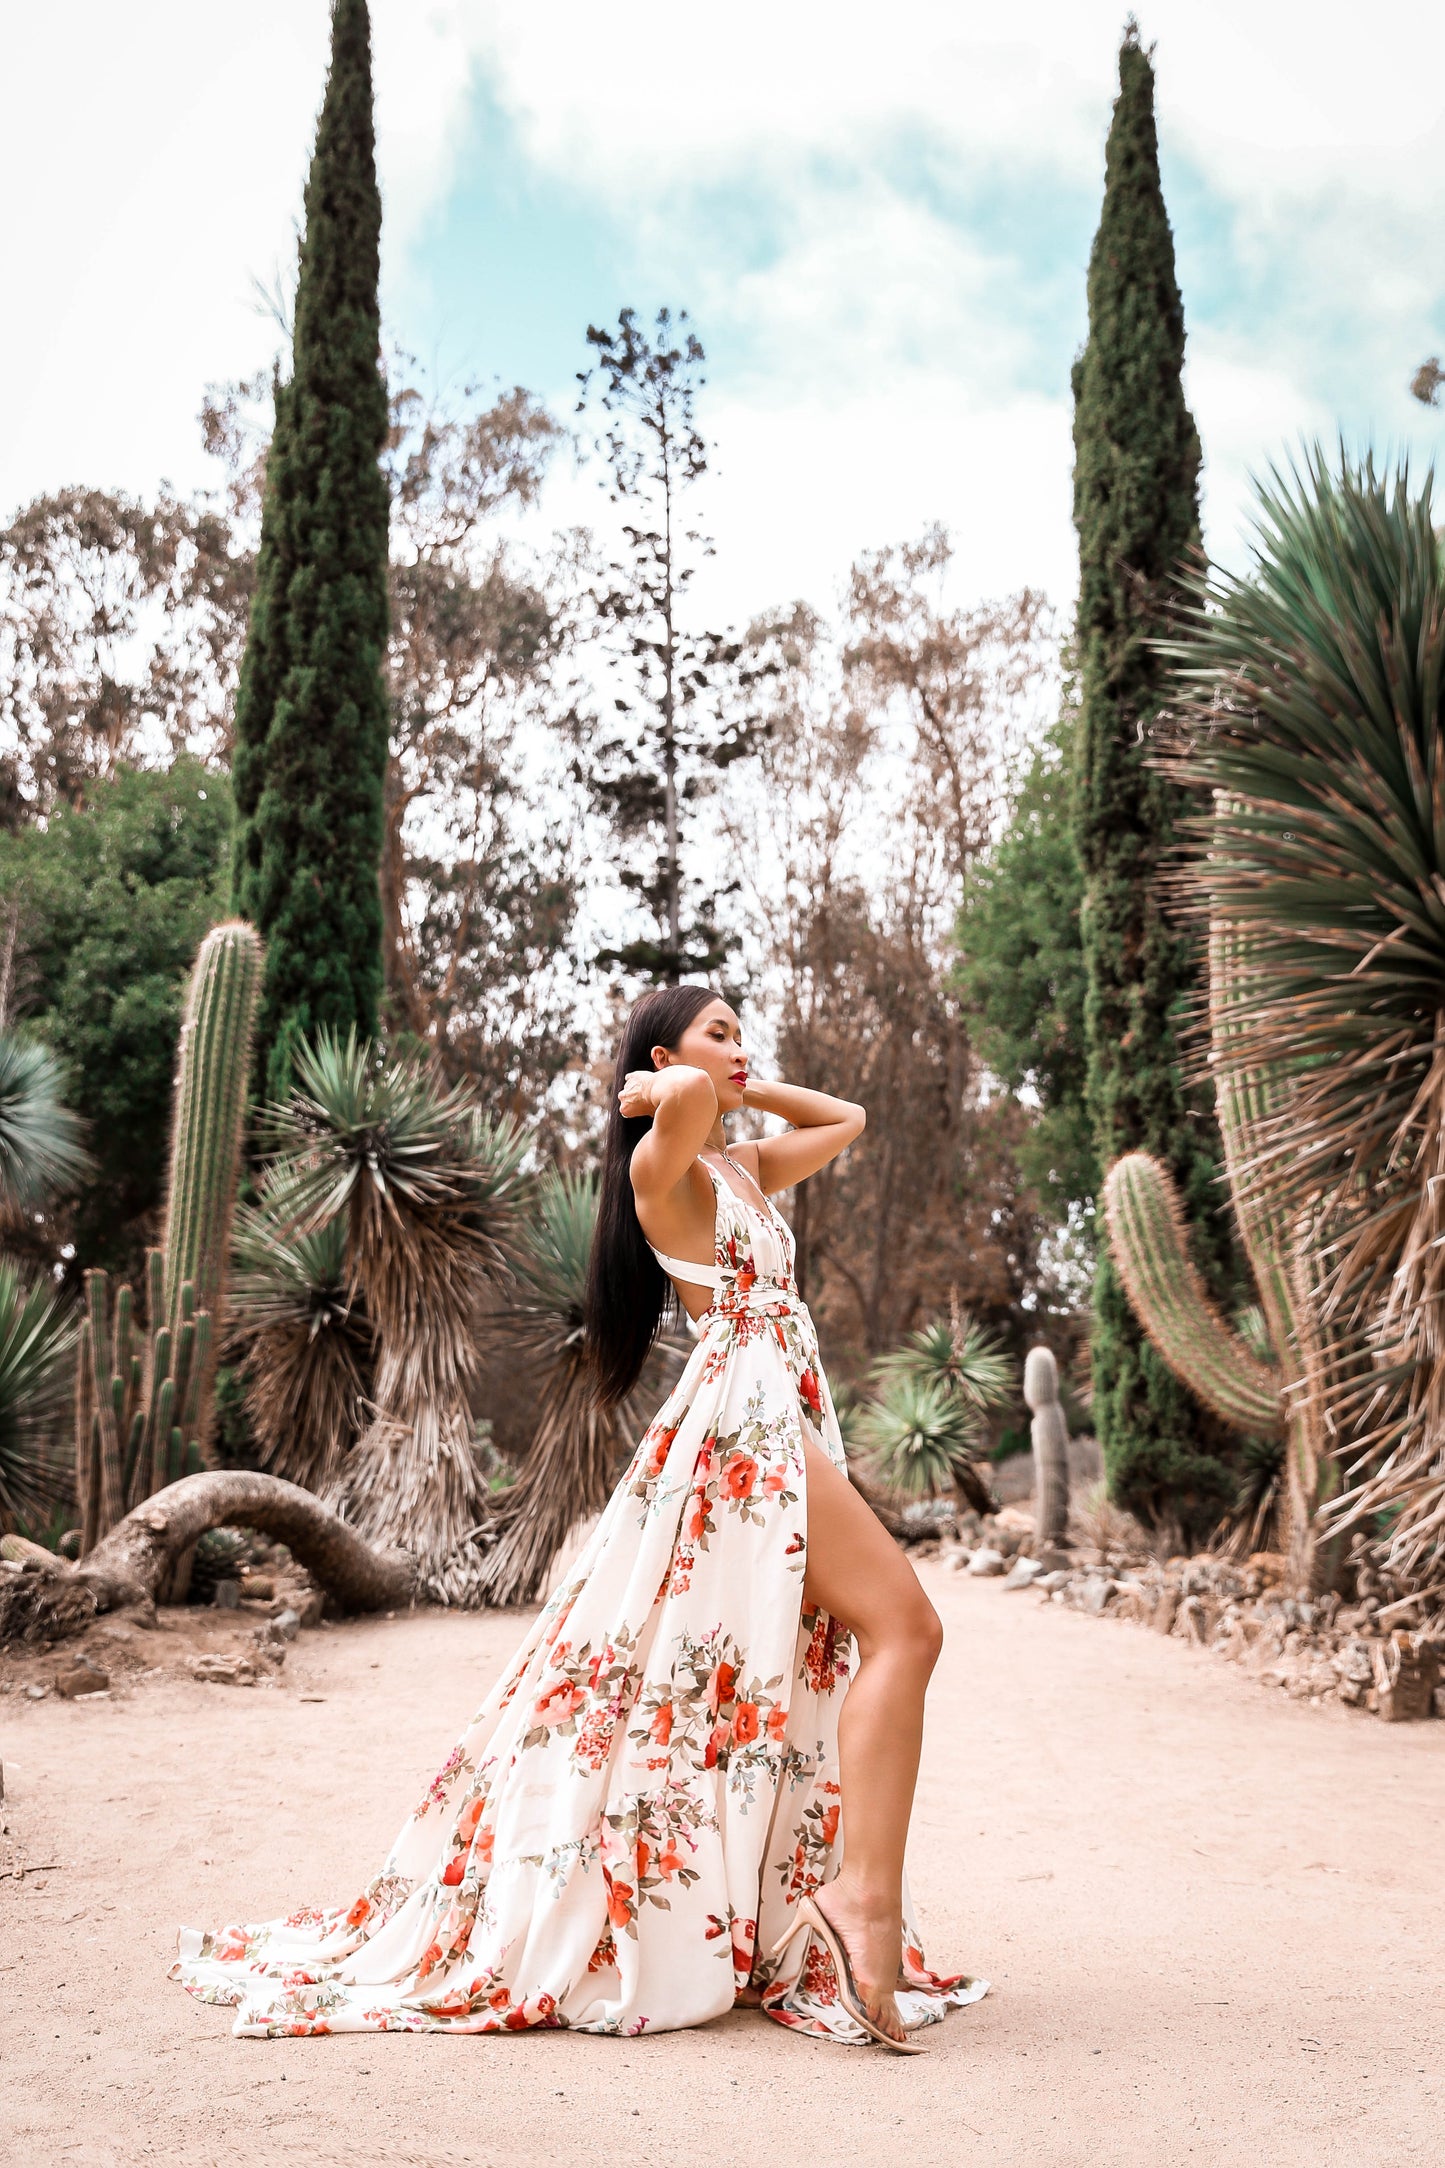 MADE TO ORDER: The Palm Springs Dress in Floral